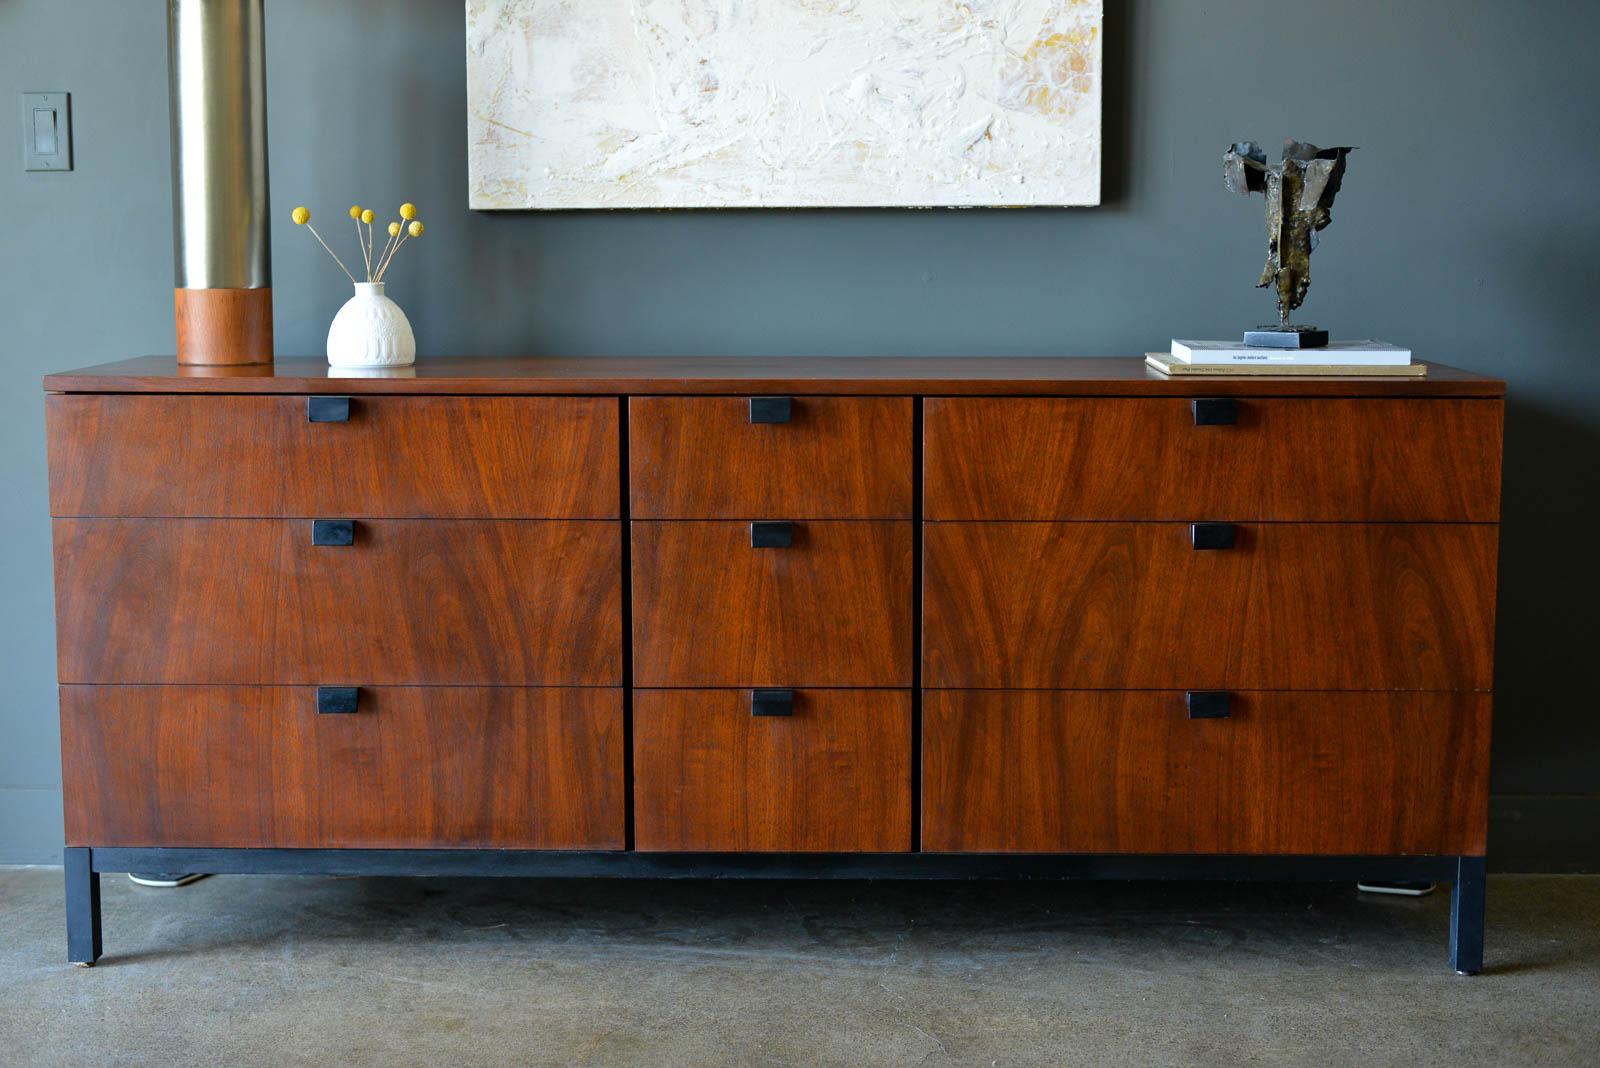 Milo Baughman for Directional 9 Drawer Walnut Dresser, ca. 1970. Beautiful walnut grain and ebonized hardware and base/leg trim. Piece is in original vintage condition, has not been refinished, just hand oiled and polished. 8/10 rating. Beautiful